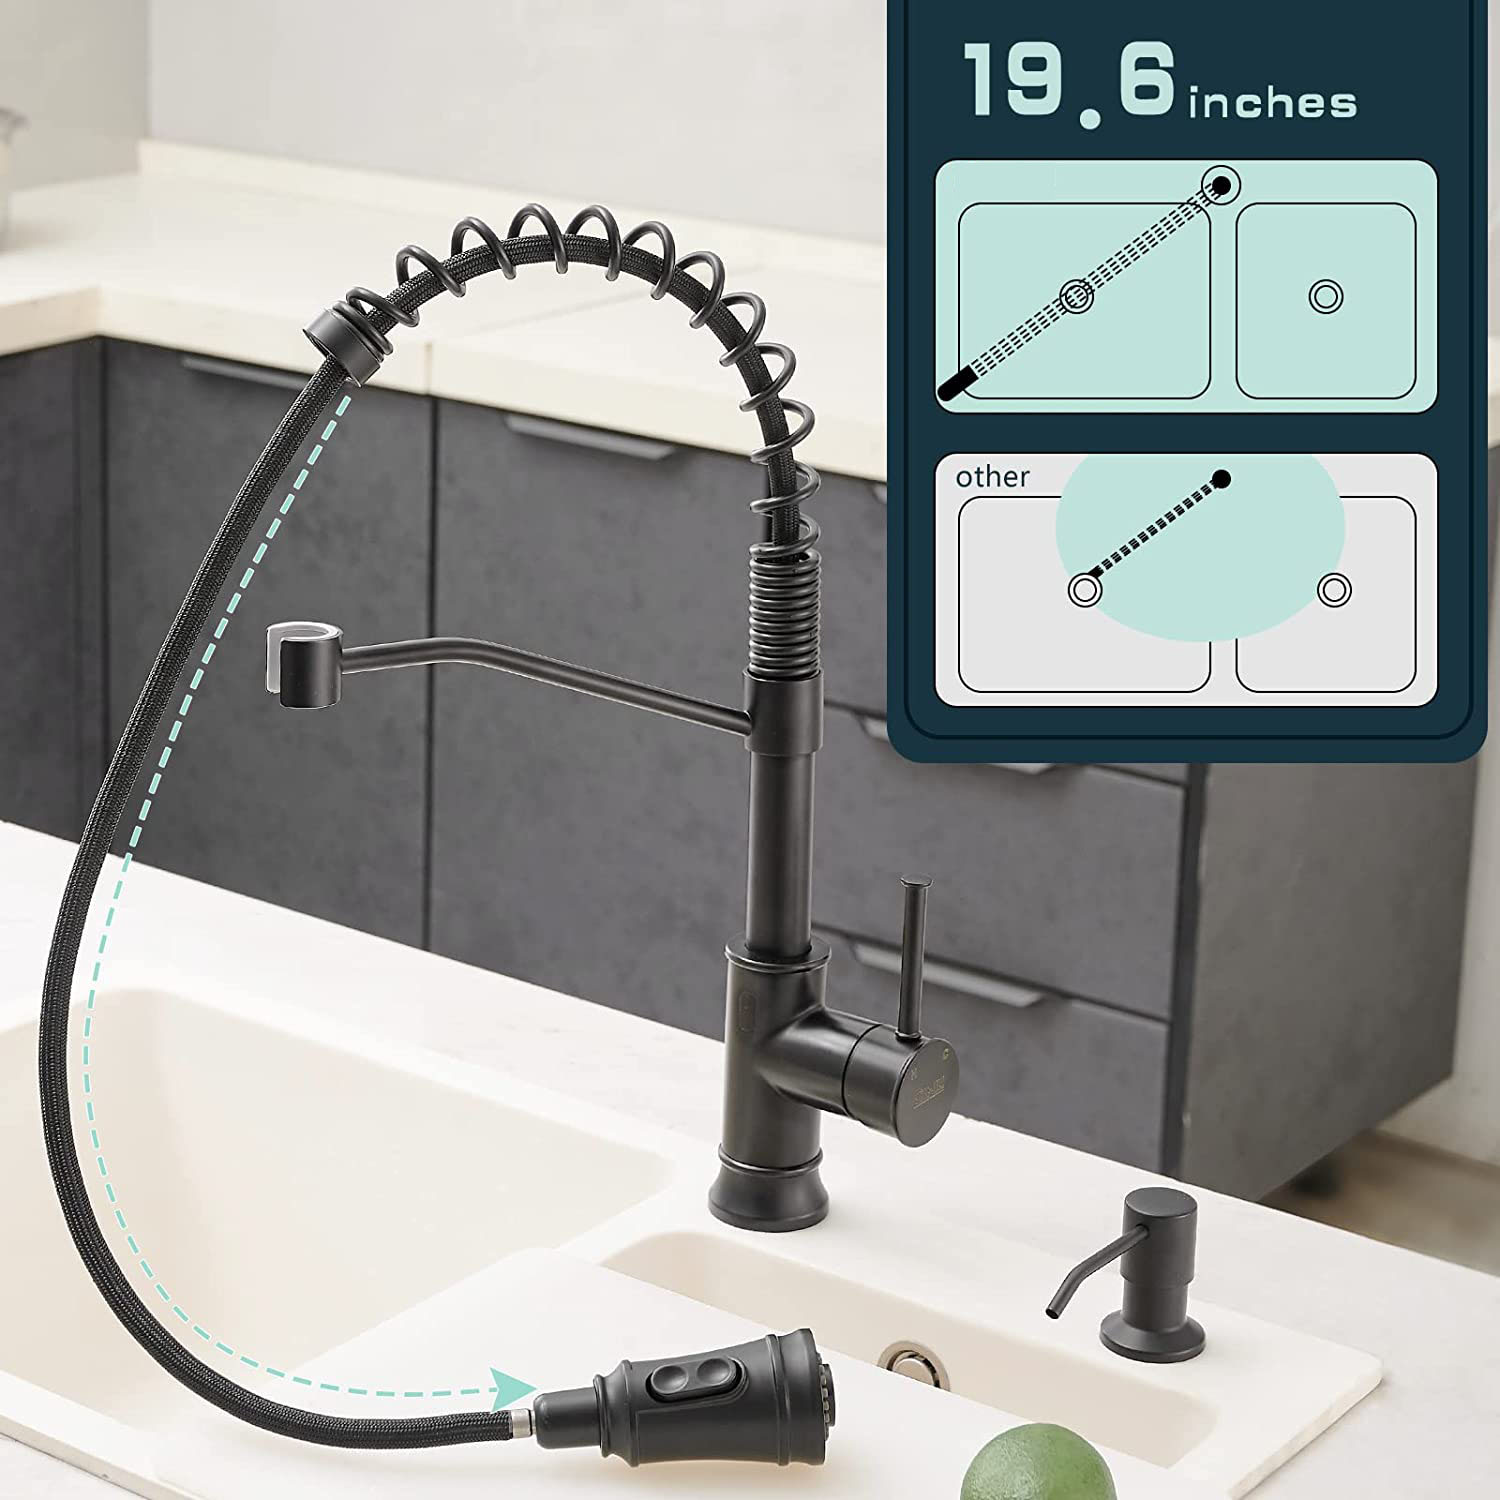 Matte Black Touchless Kitchen Sink Faucet with Pull Down Sprayer, Motion Sensor Activated Hands-Free Single Handle Kitchen Faucet.